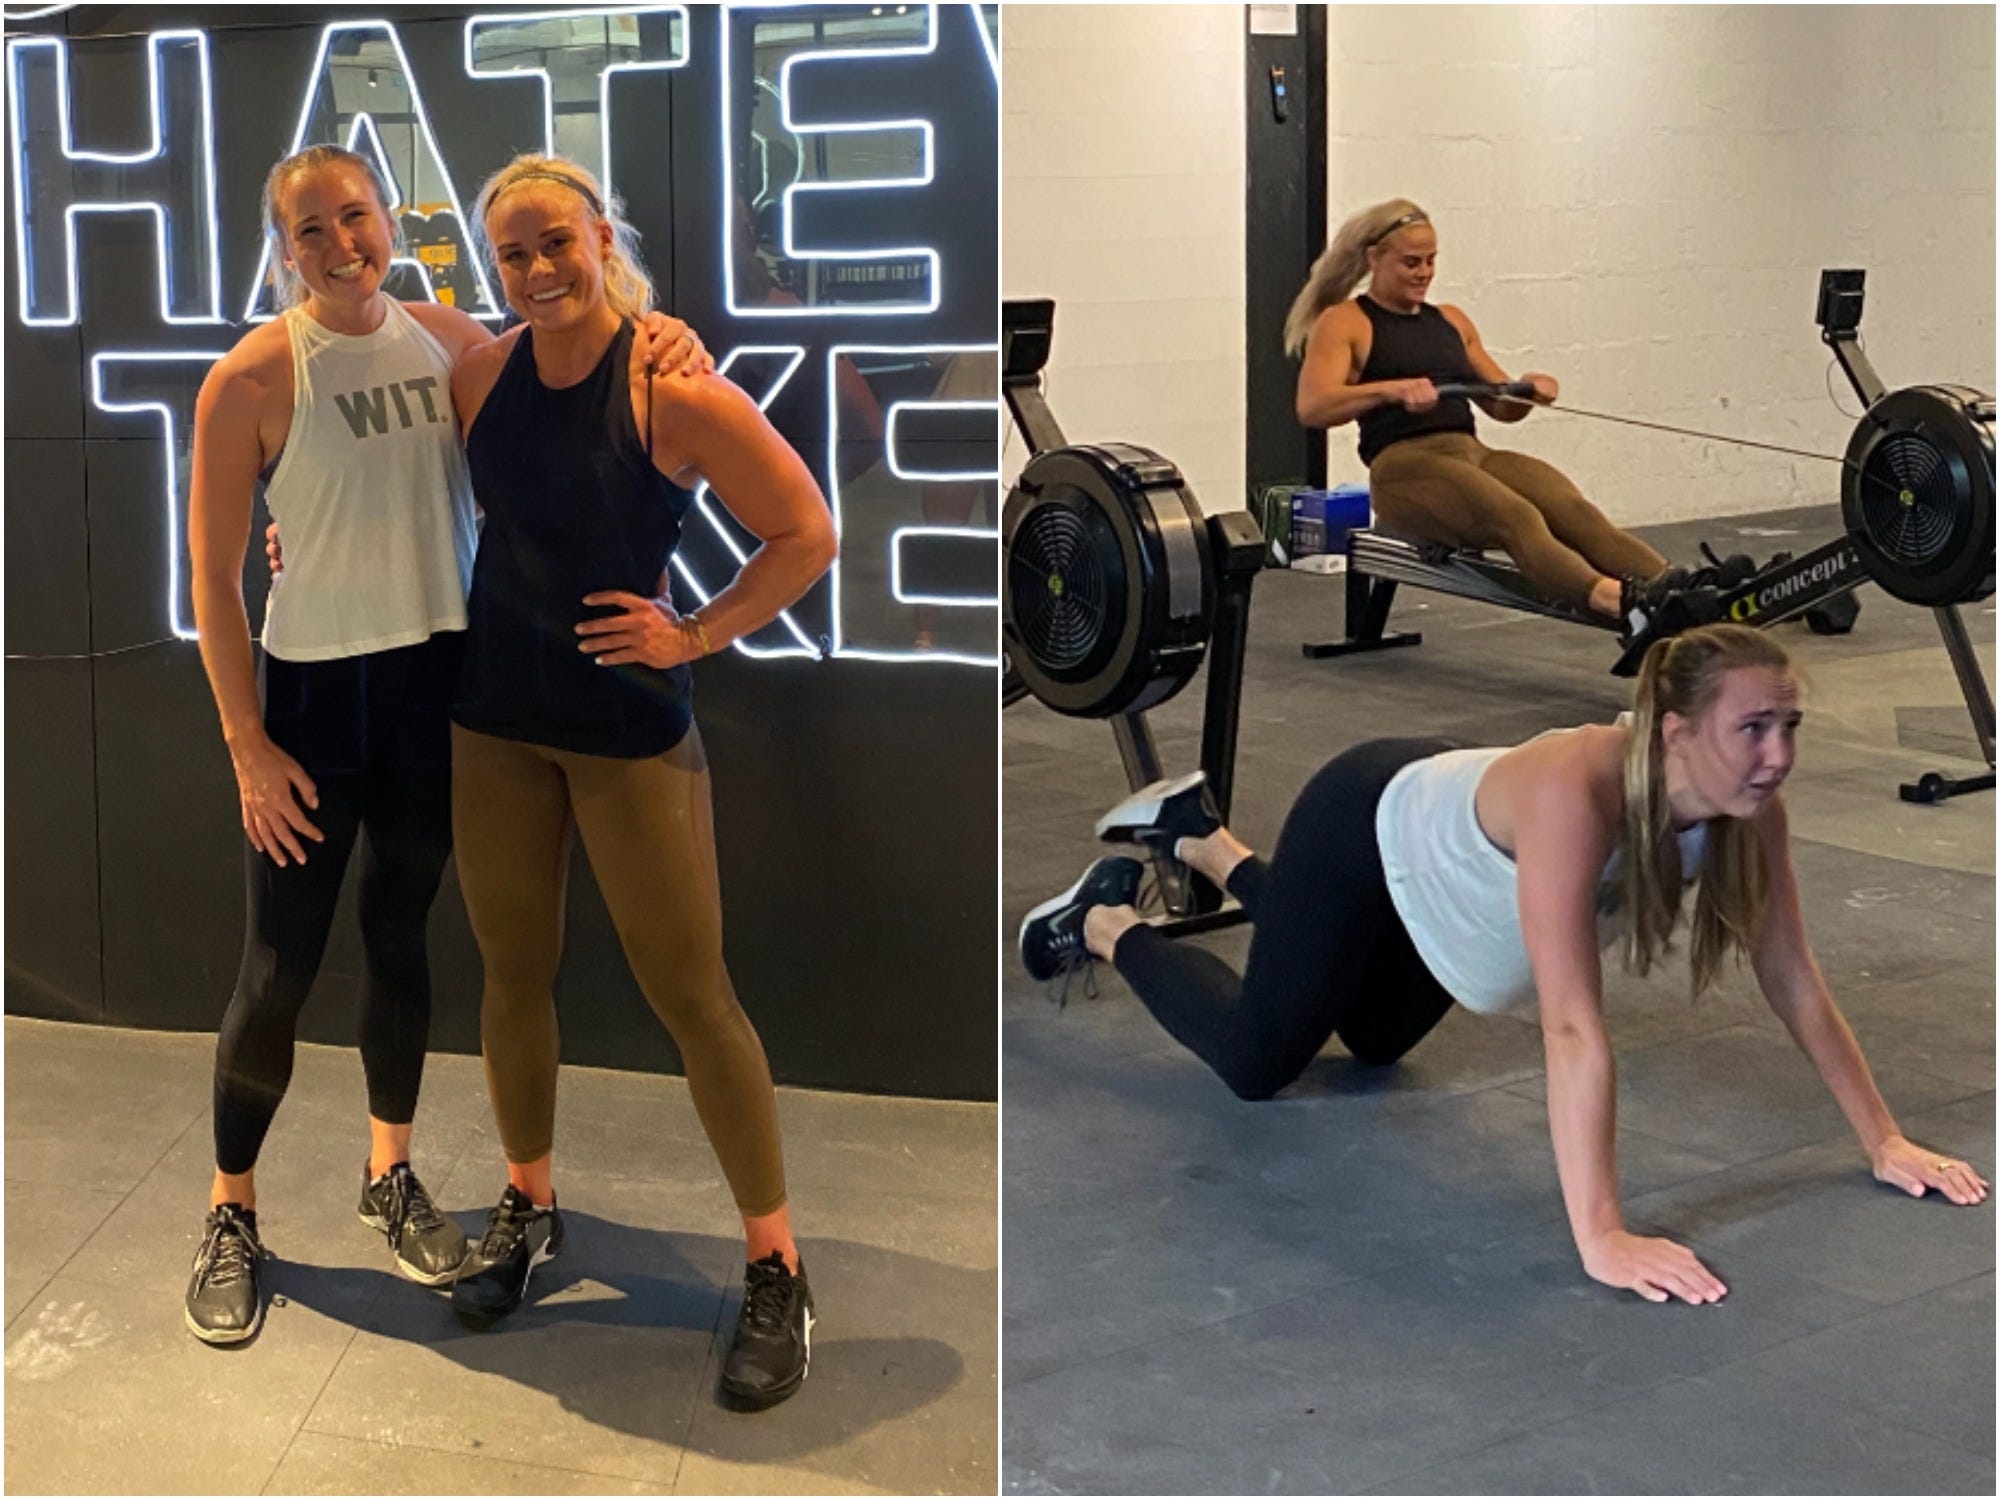 borstel Aarzelen voorjaar I trained with Crossfit star Sara Sigmundsdottir for just 20 minutes, and  she kicked my butt even though I work out 6 days a week